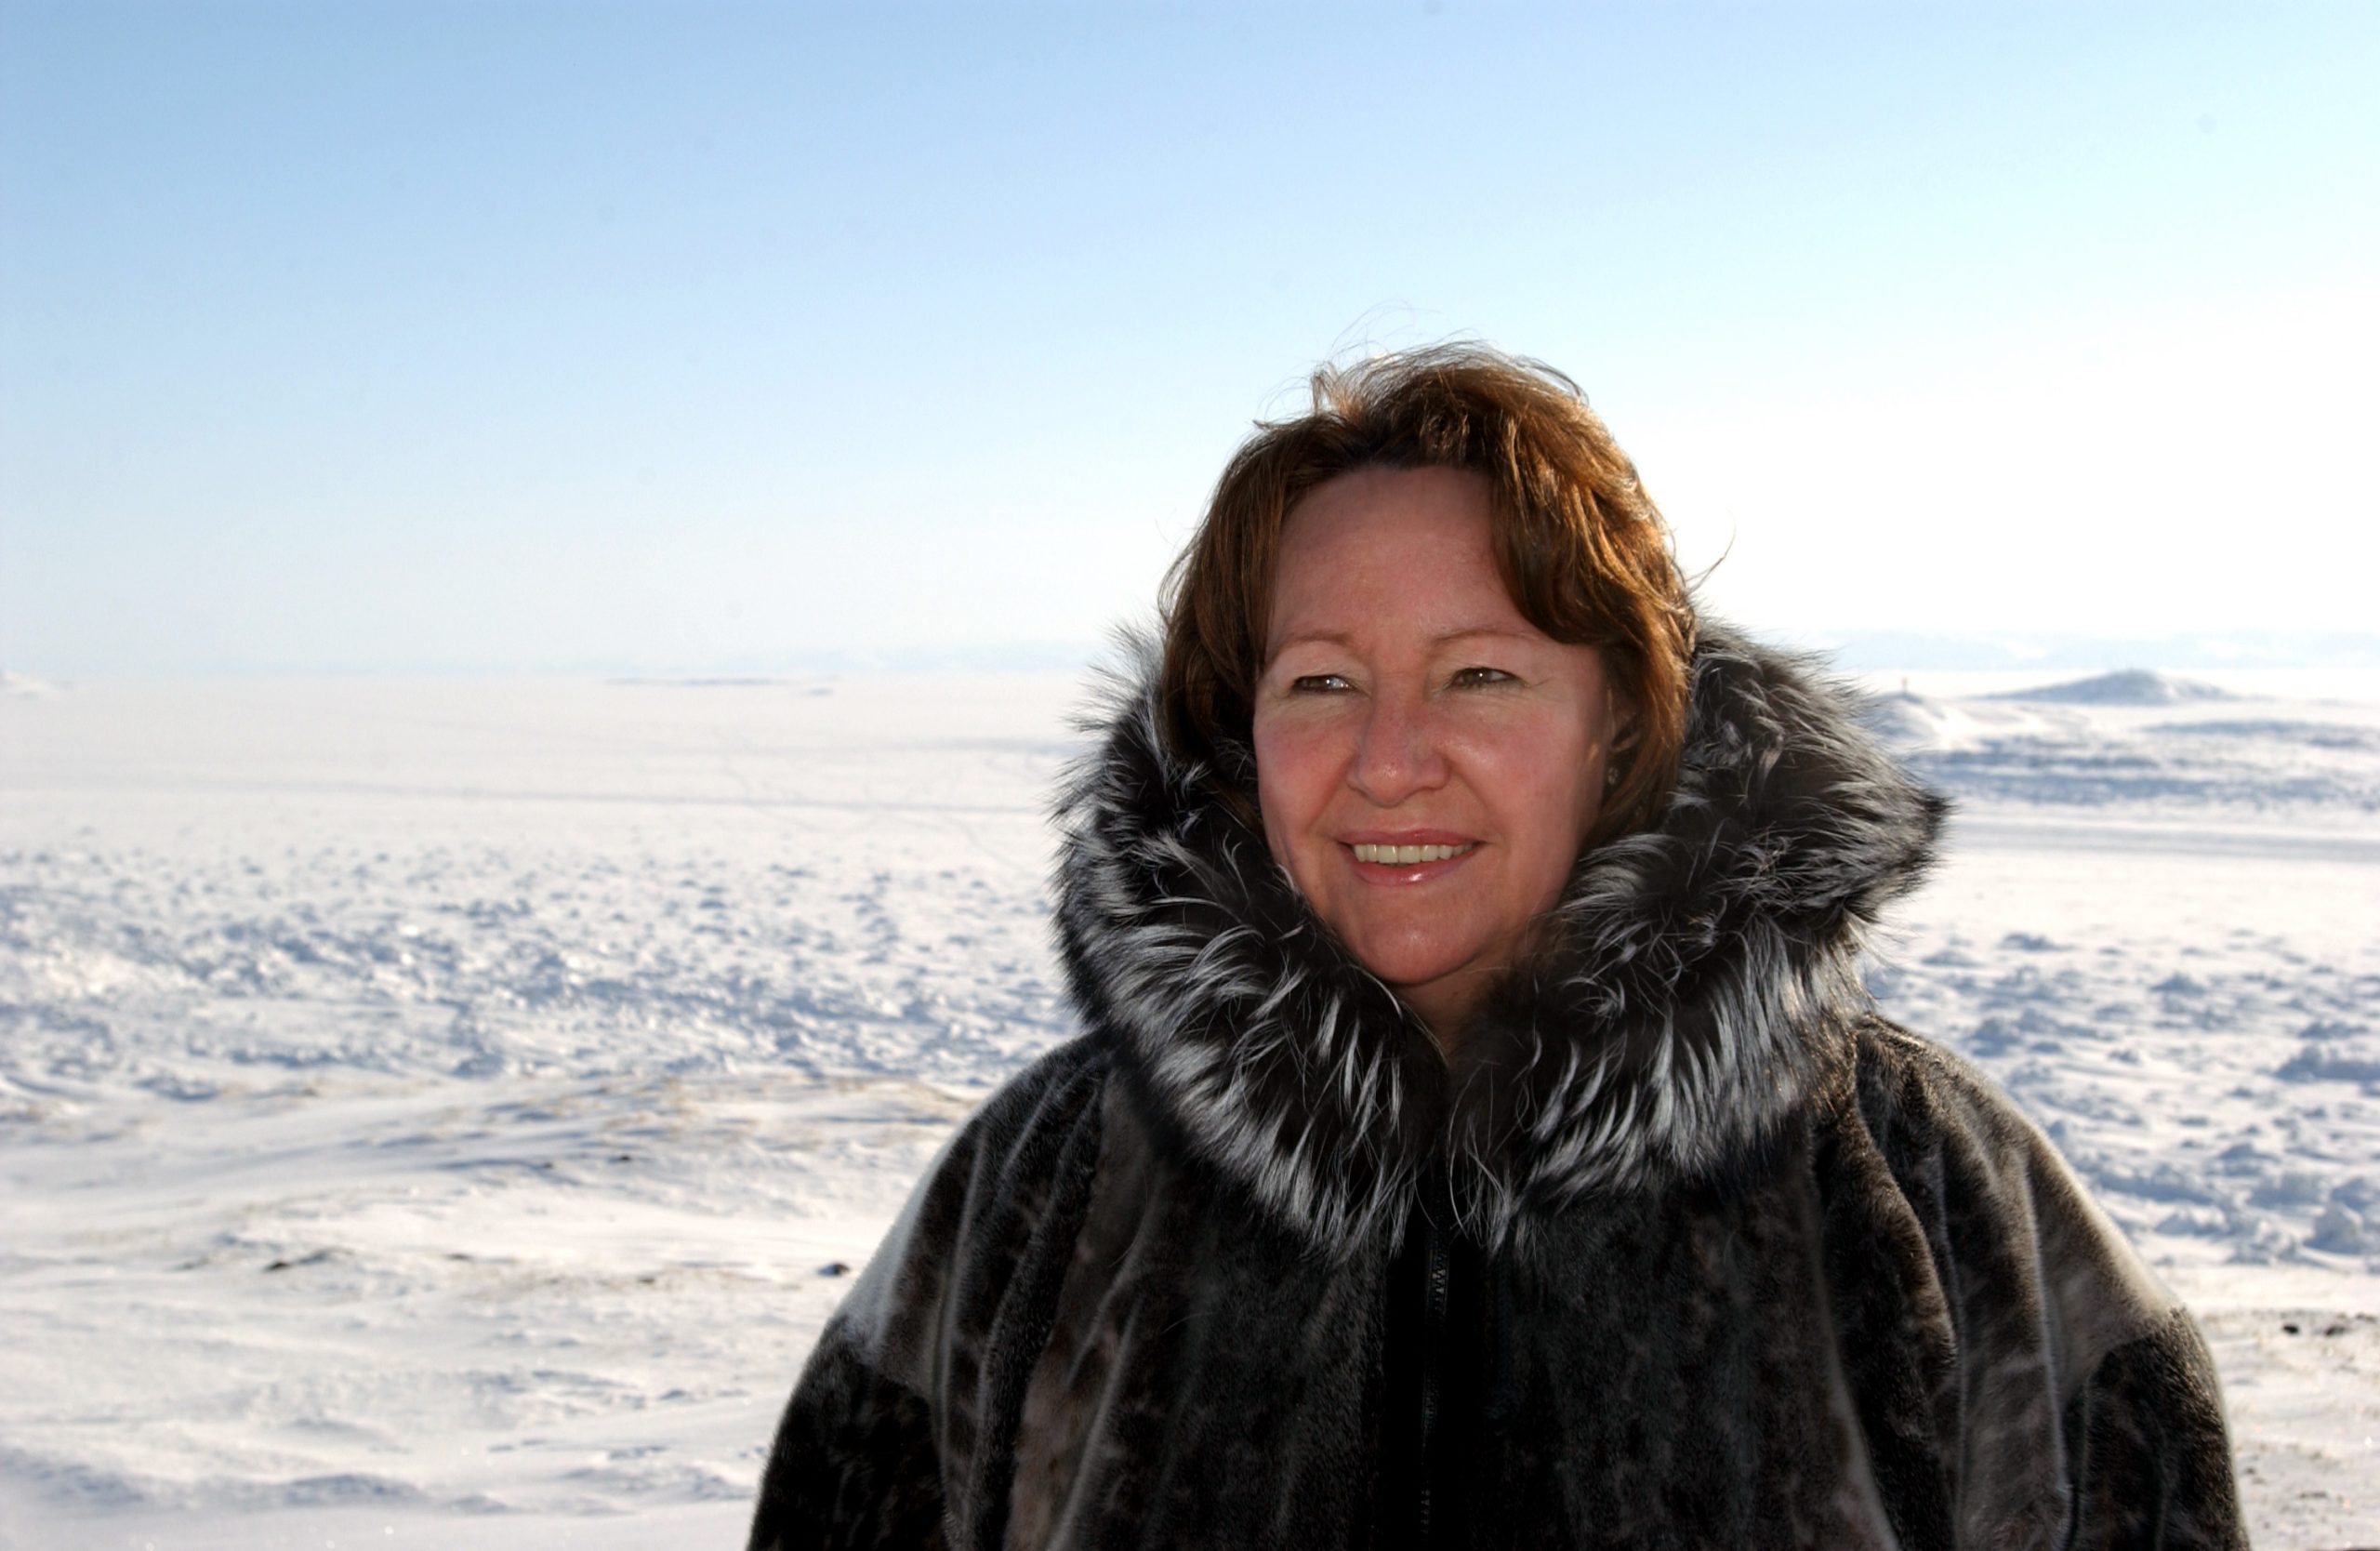 Announcing Nobel Peace Prize nominee Sheila Watt-Cloutier as a speaker at the CanWaCH Healthy World Conference